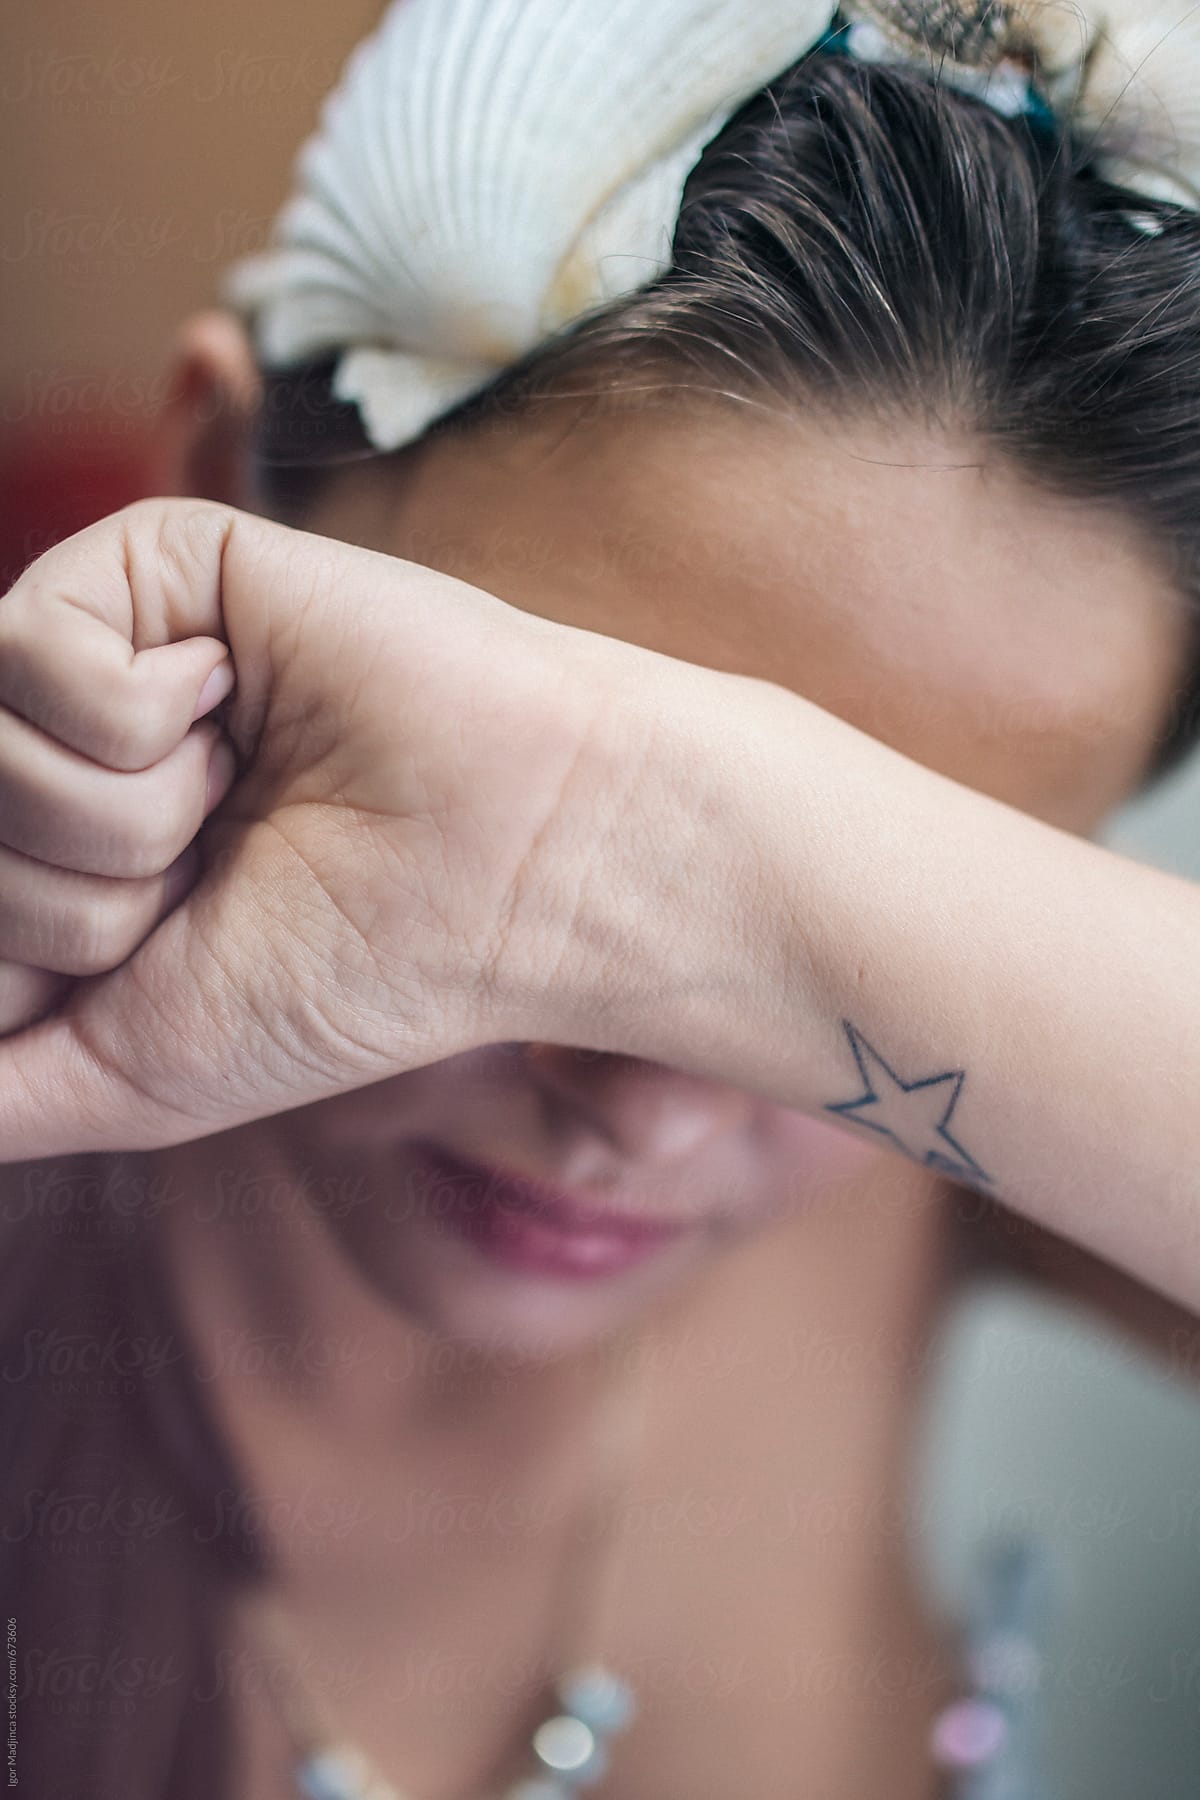 girl with a star tattoo  hiding behind her hand, shame